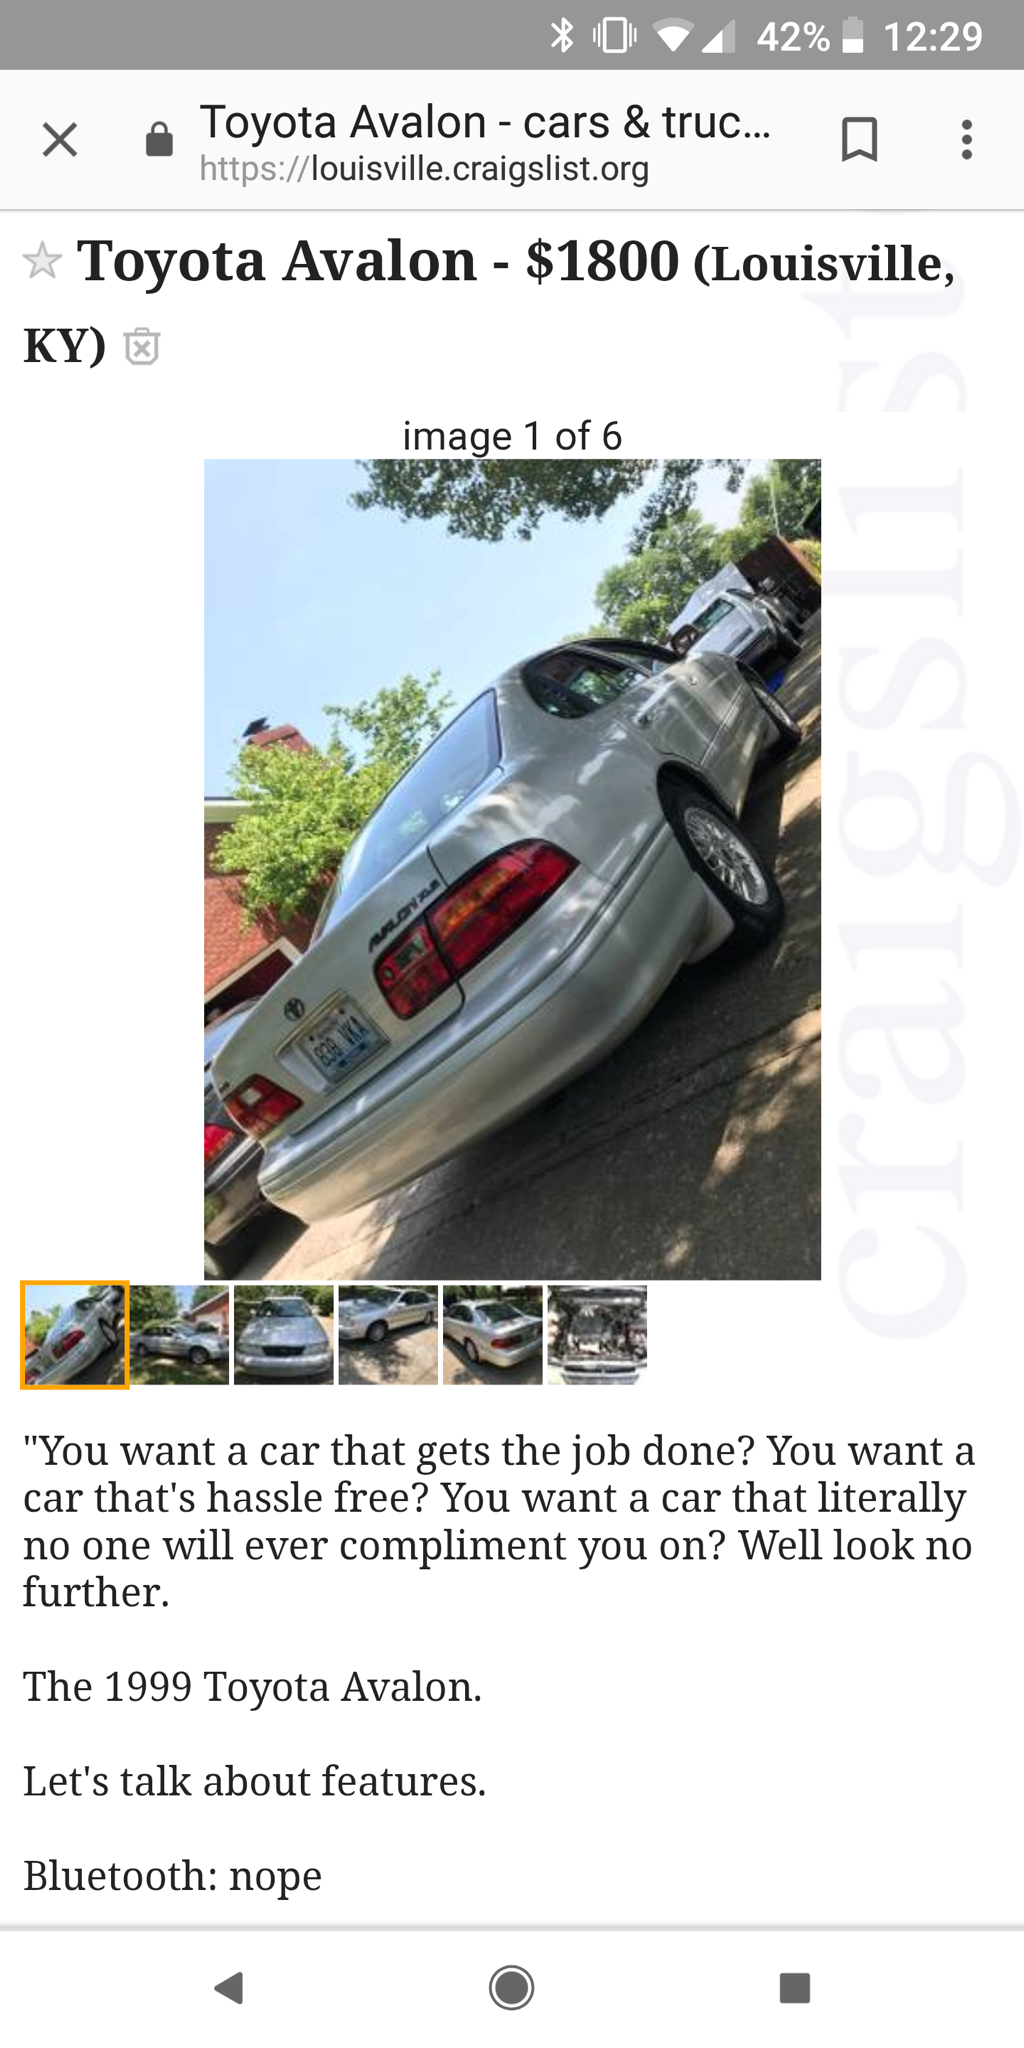 funny craigslist car ads - %0 42%. T oyota Avaloncars & truc... http louisville craigslist.org x Toyota Avalon $1800 Louisville, Ky Image 1 of 6 "You want a car that gets the job done? You want a car that's hassle free? You want a car that literally no on